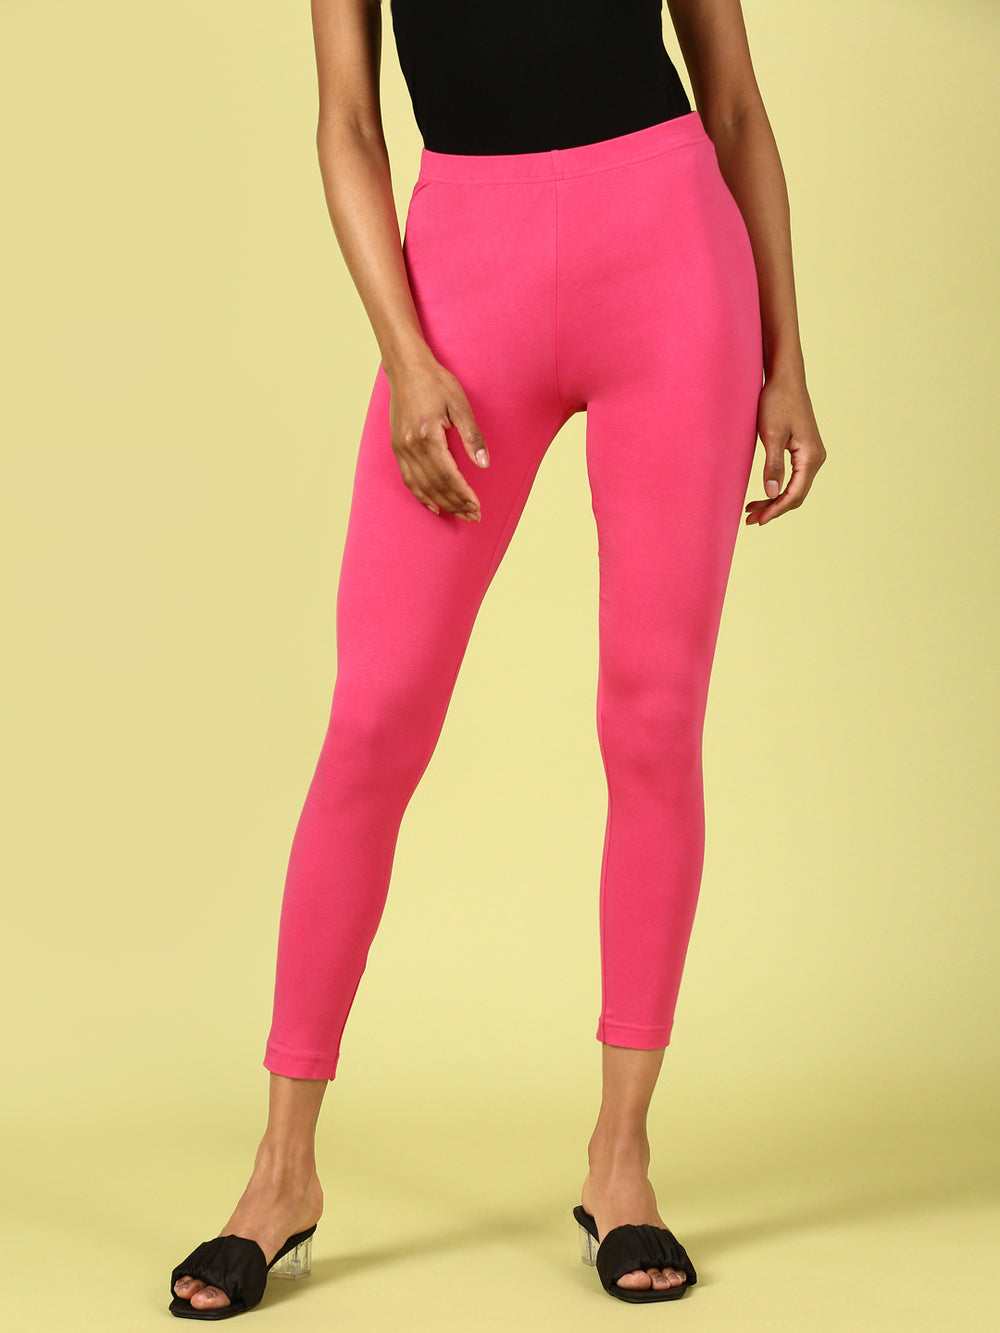 Buy online Pink Floral Legging from girls for Women by De Moza for ₹199 at  50% off